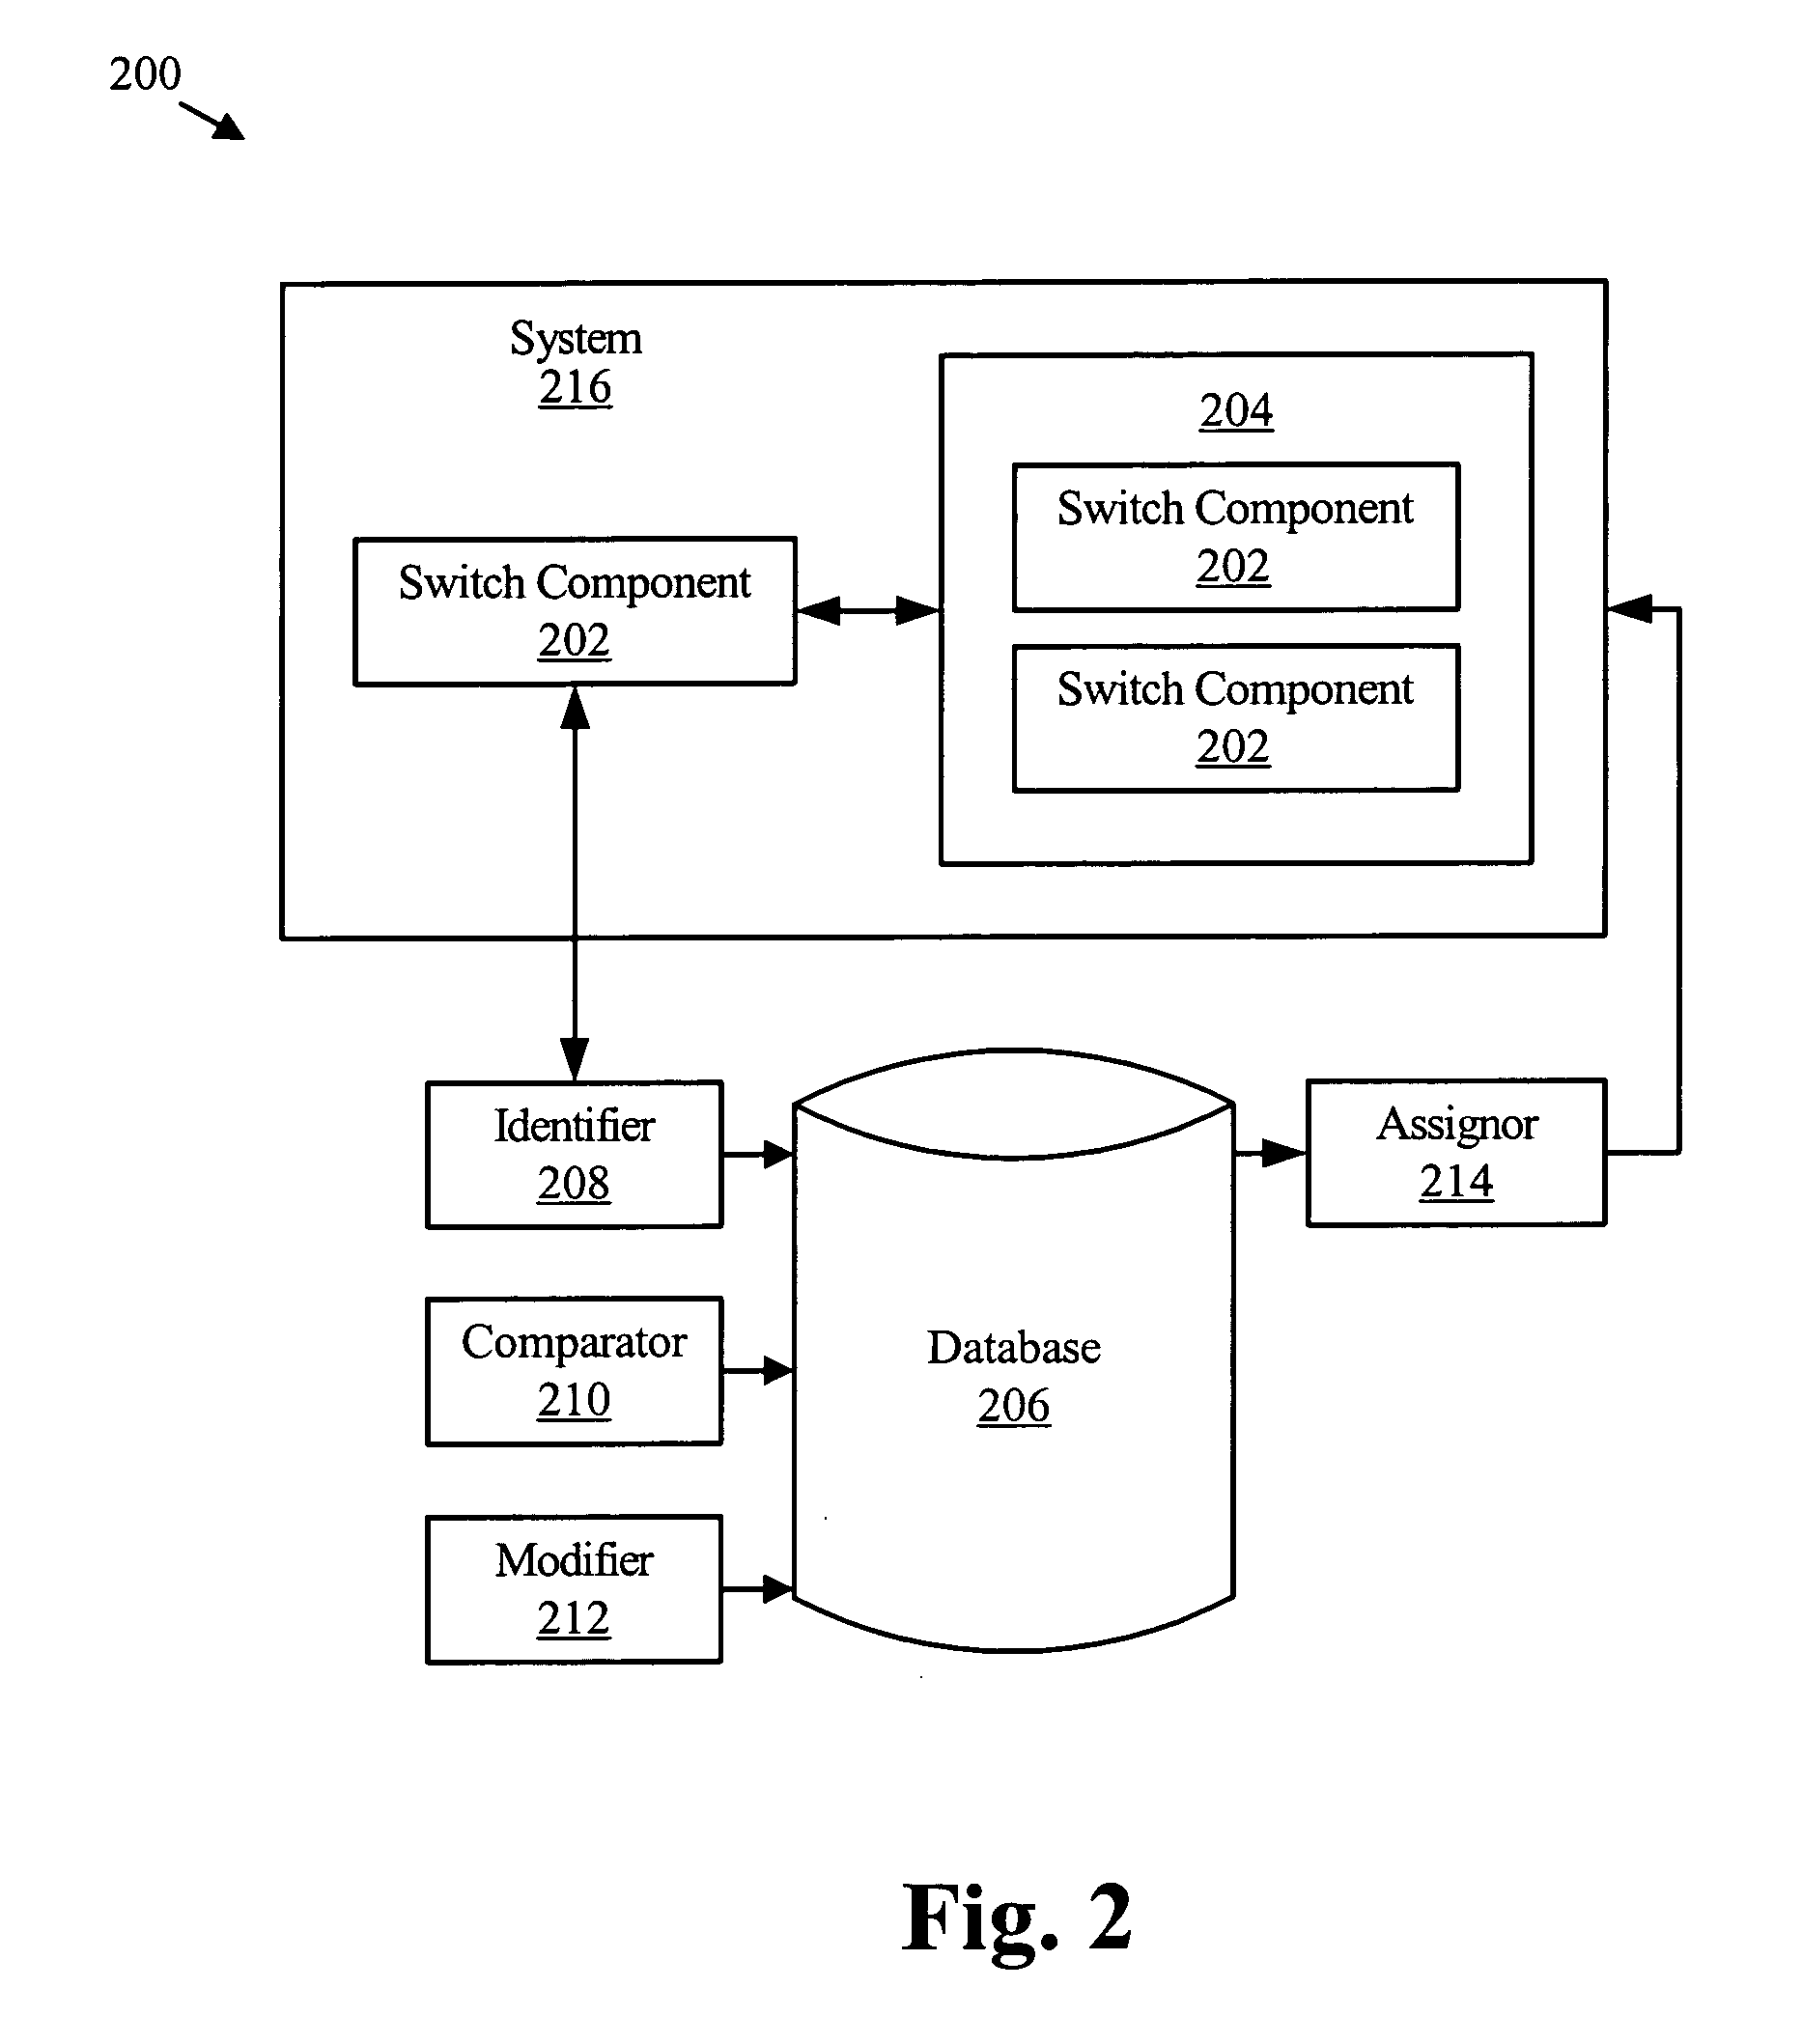 Apparatus, system, and method for generating a name for a system of devices